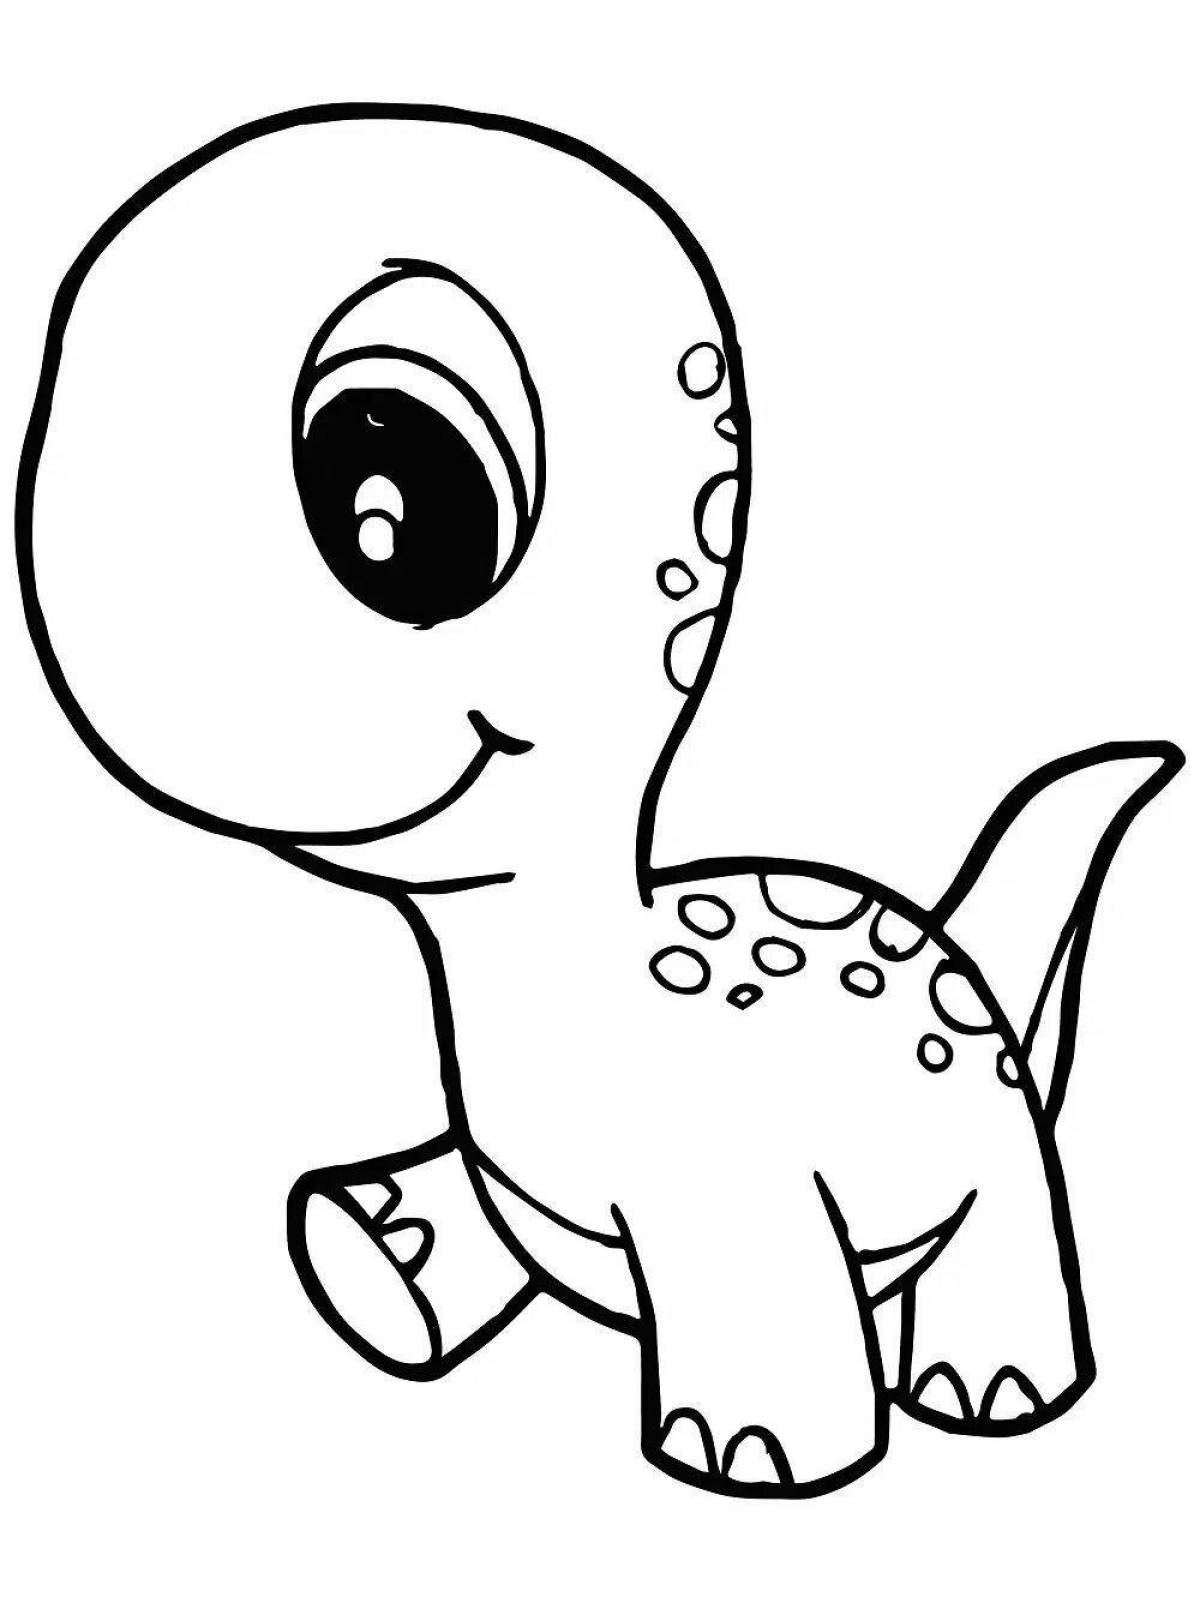 Great dinosaur coloring book for kids